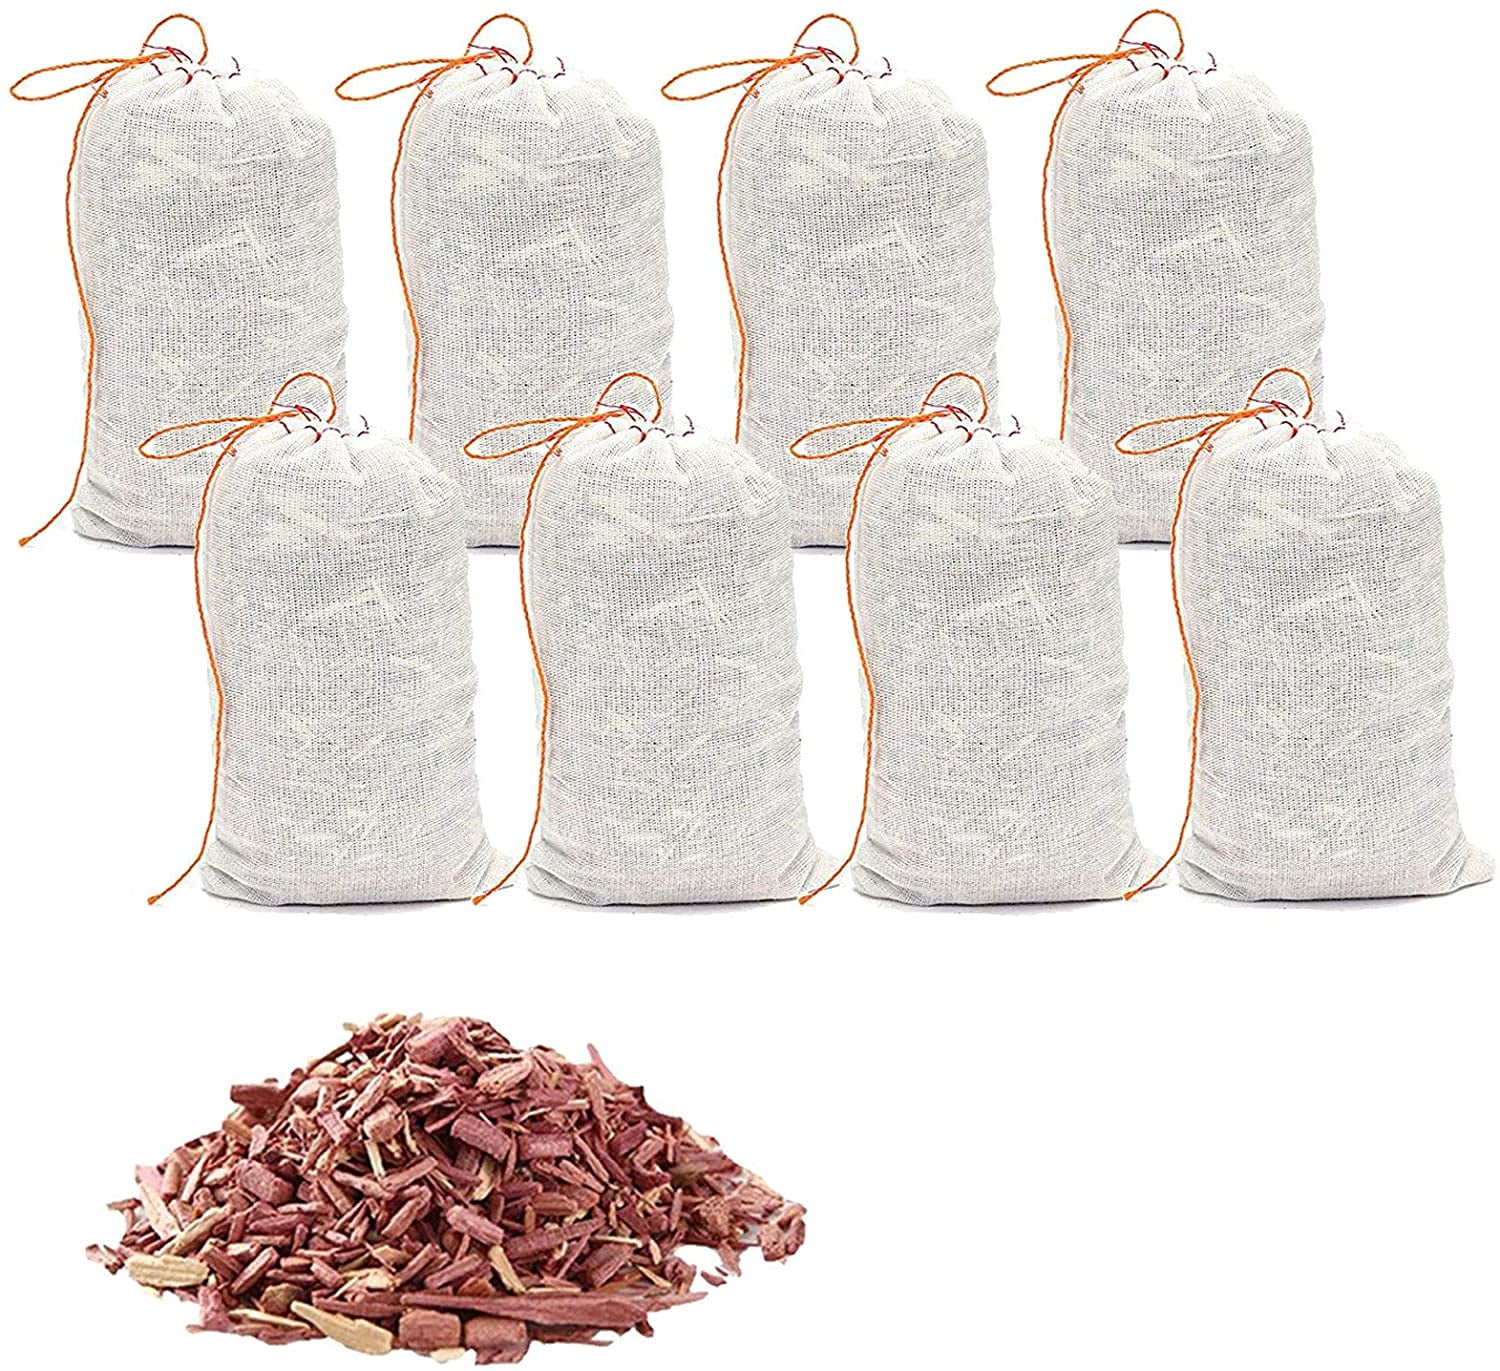 Cauff Natural Cedar Chips Sachets for Closet Shoe Moth Protection 6 pack 